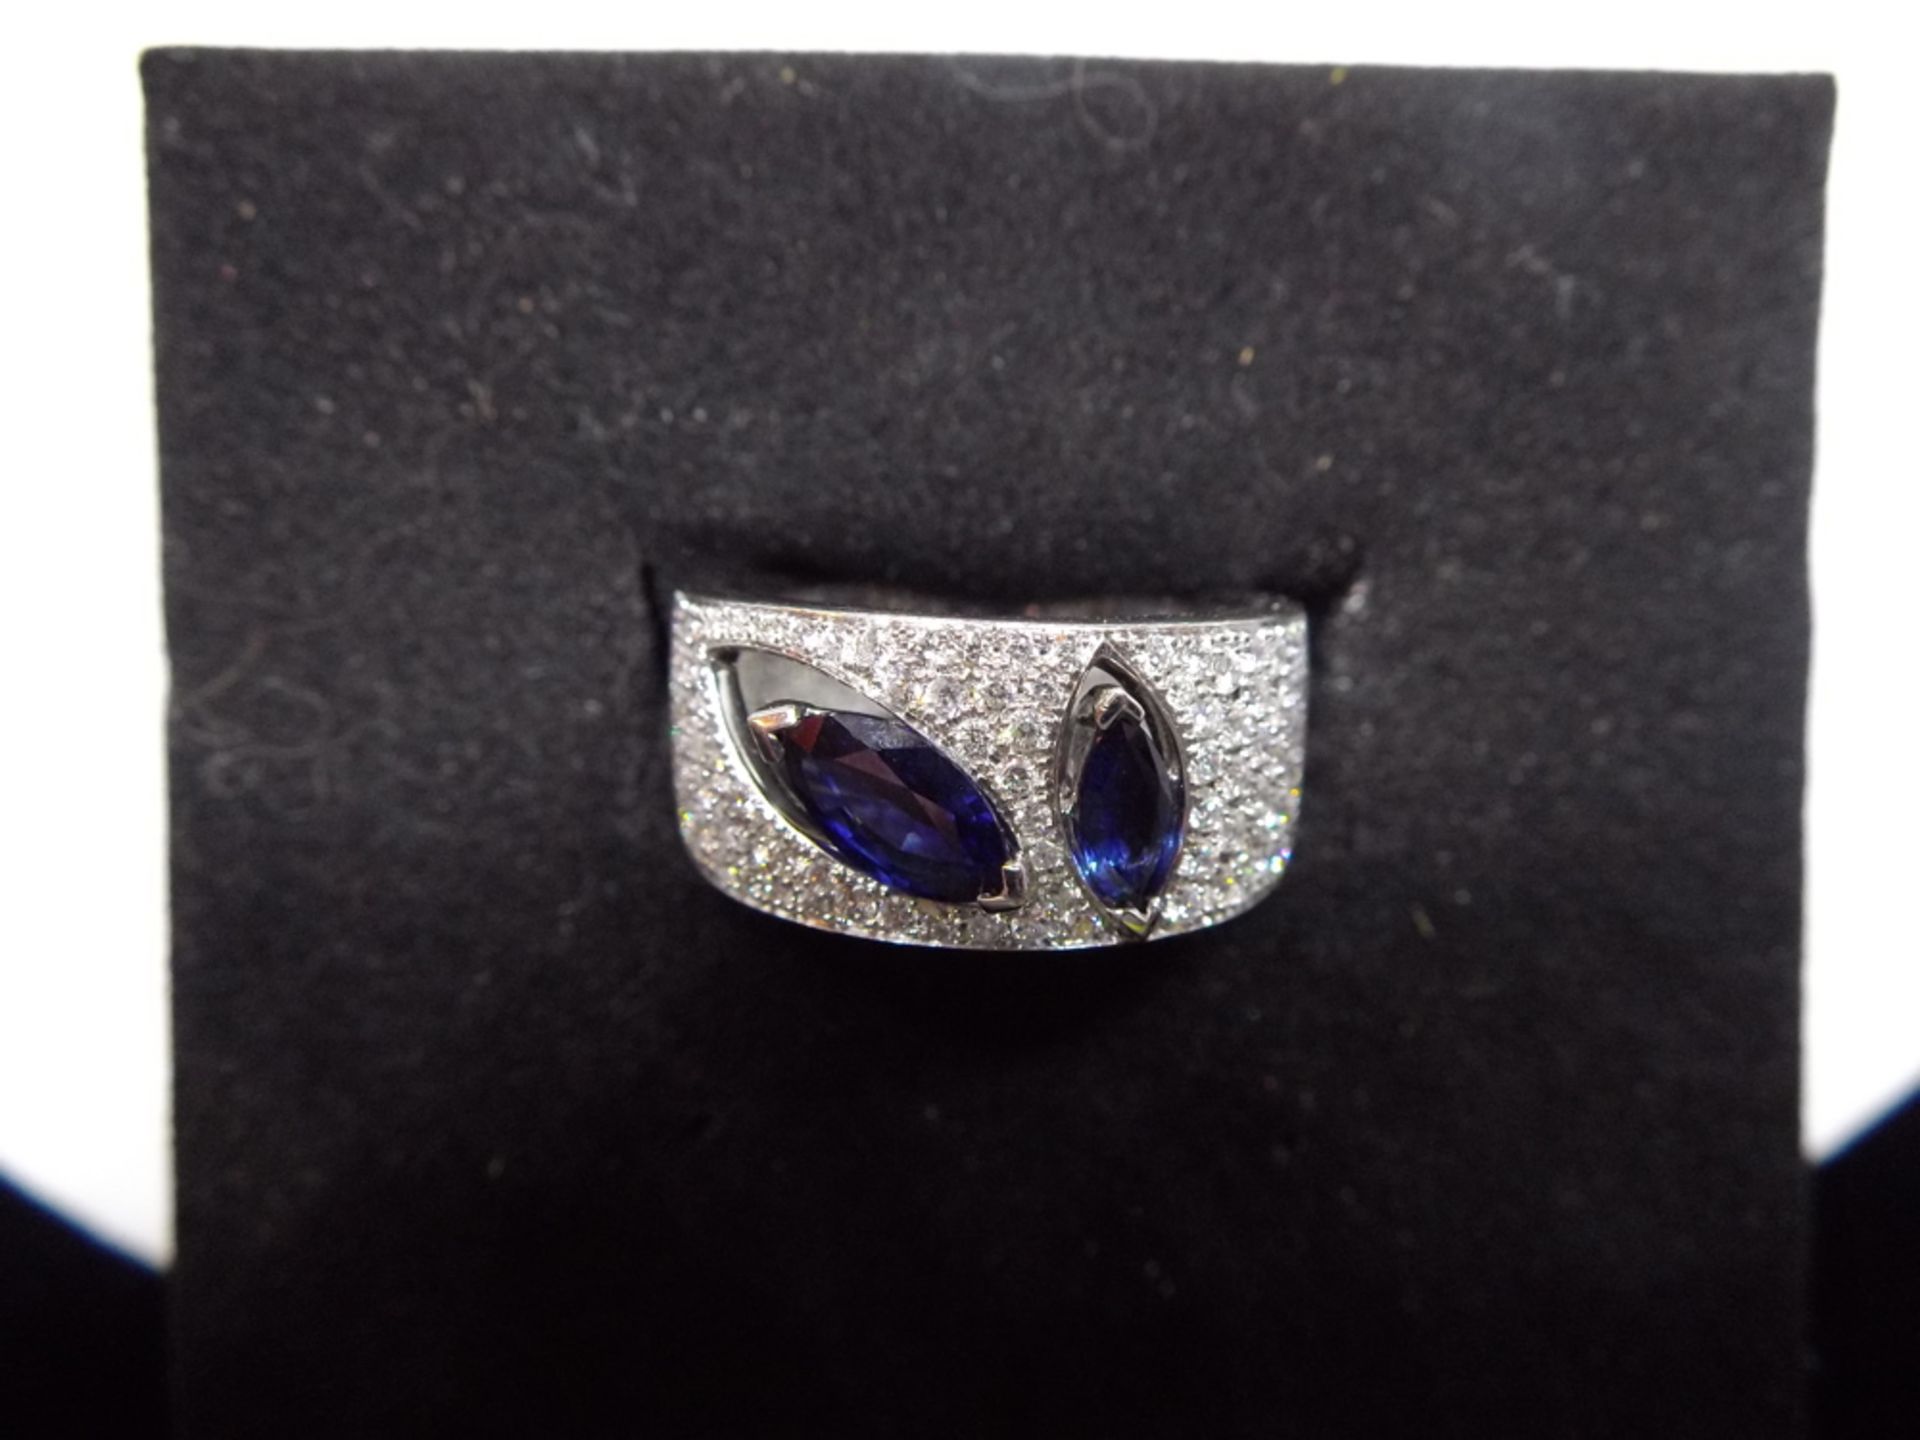 18CT White Gold and Sapphire ring - Image 4 of 4